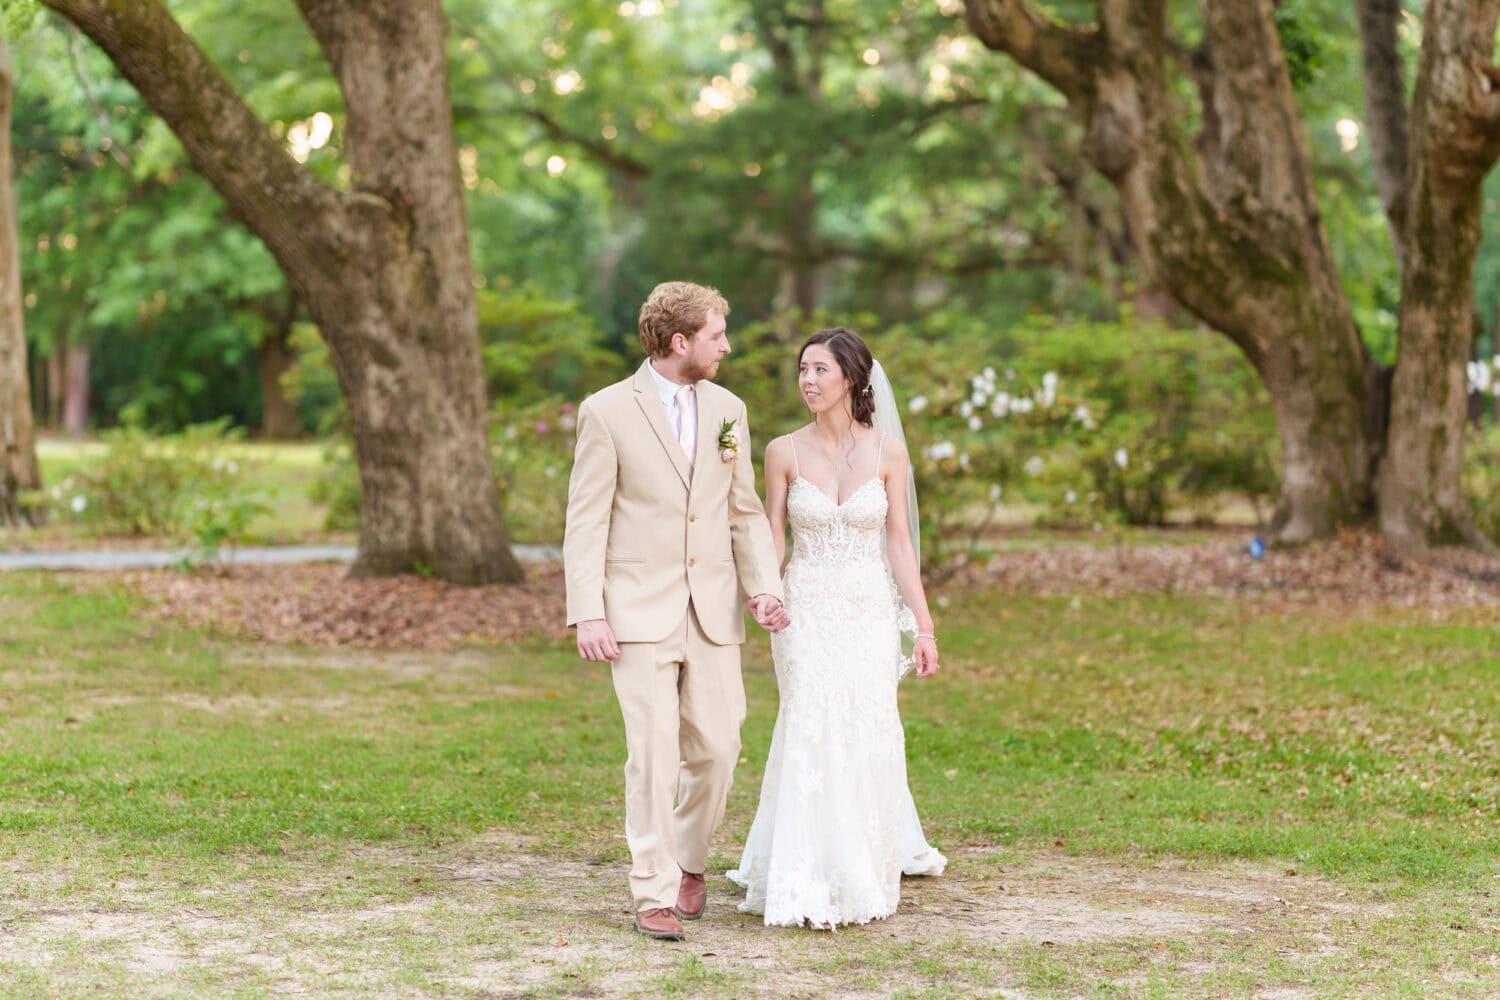 Holding hands walking under the trees - Tanglewood Plantation